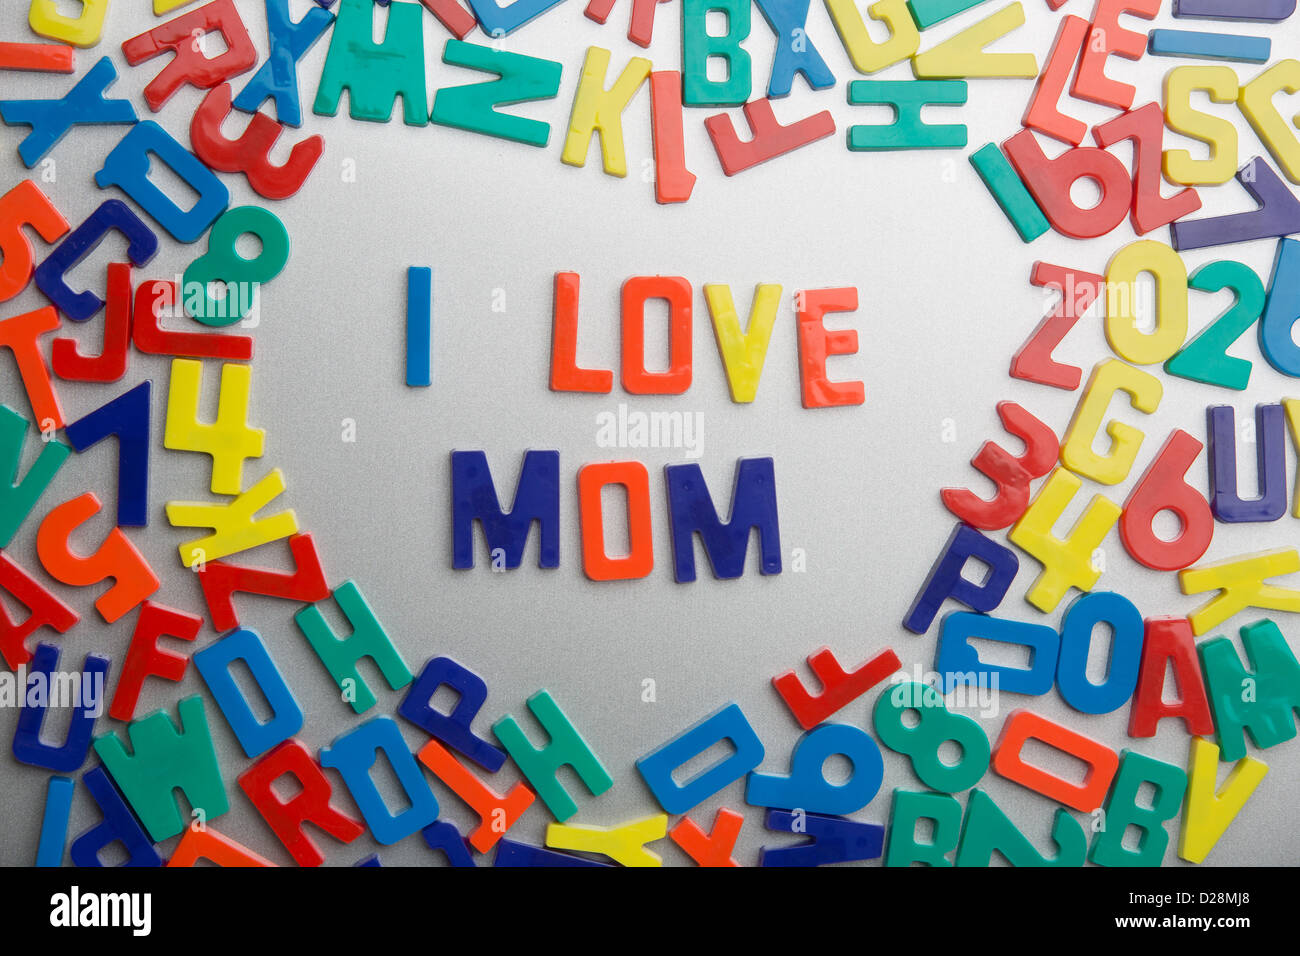 'I Love Mom' - Refrigerator magnets spell messages out of a jumble of letters Stock Photo